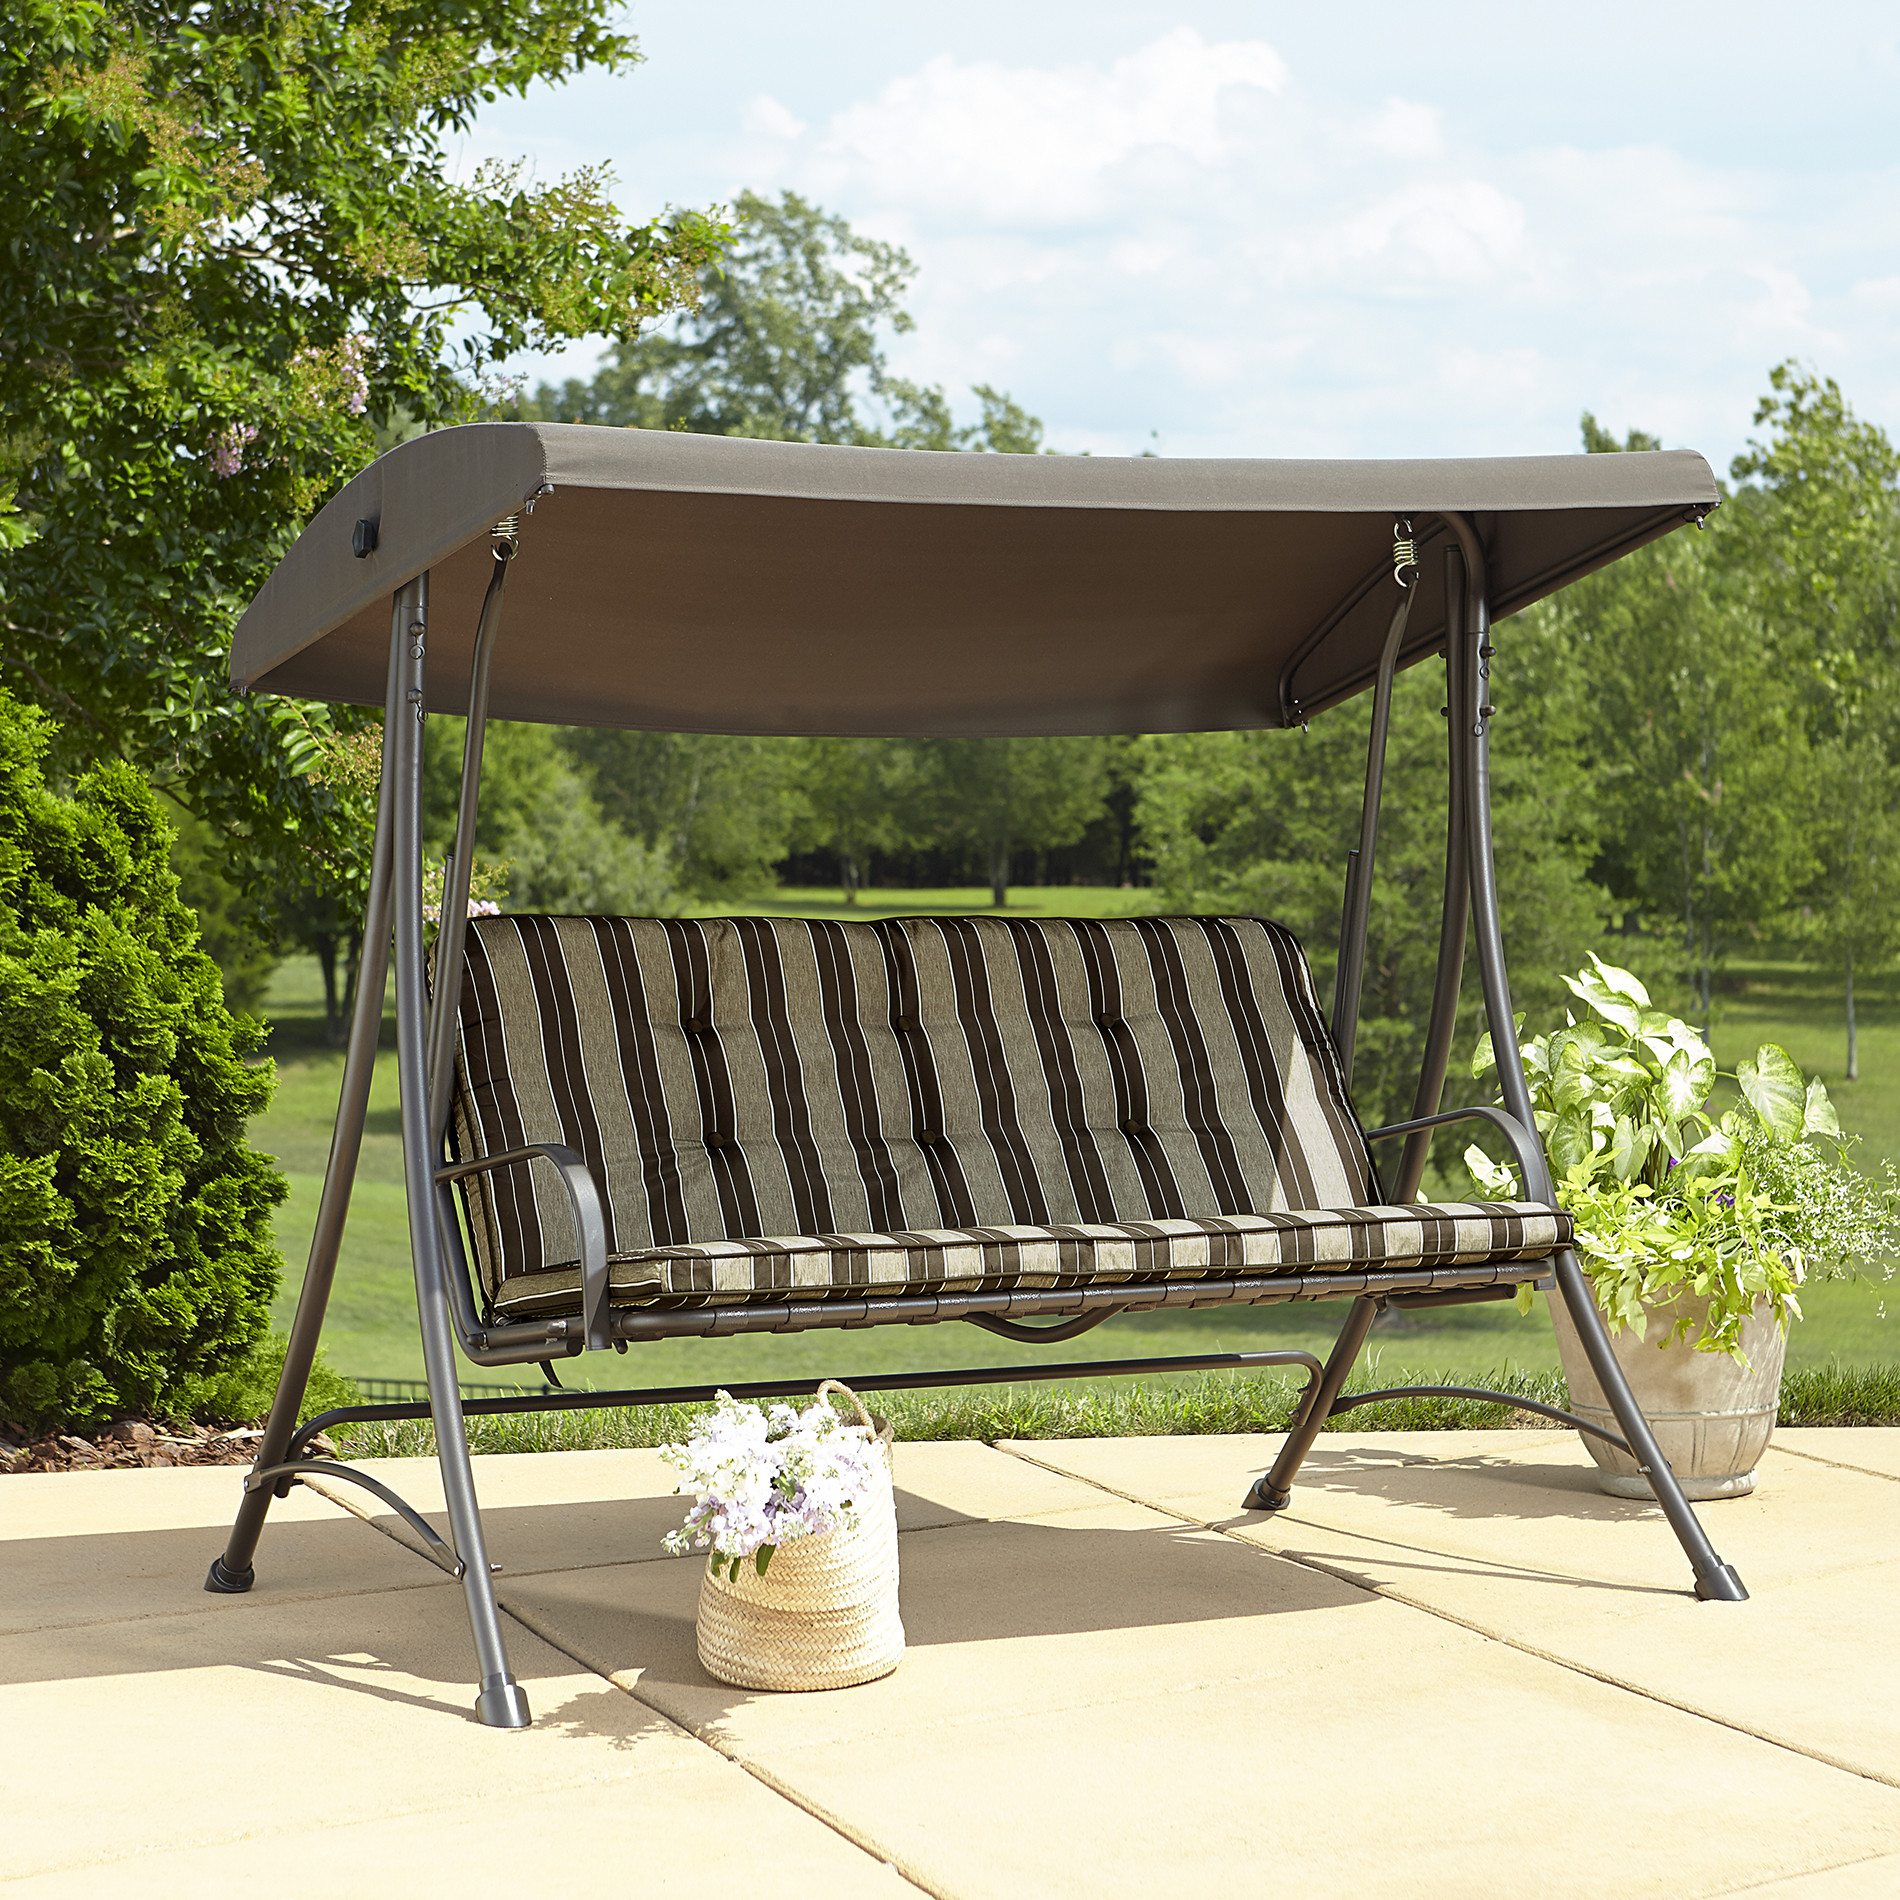 Swing Outlet
 Garden Oasis 3 Seat Swing with Canopy